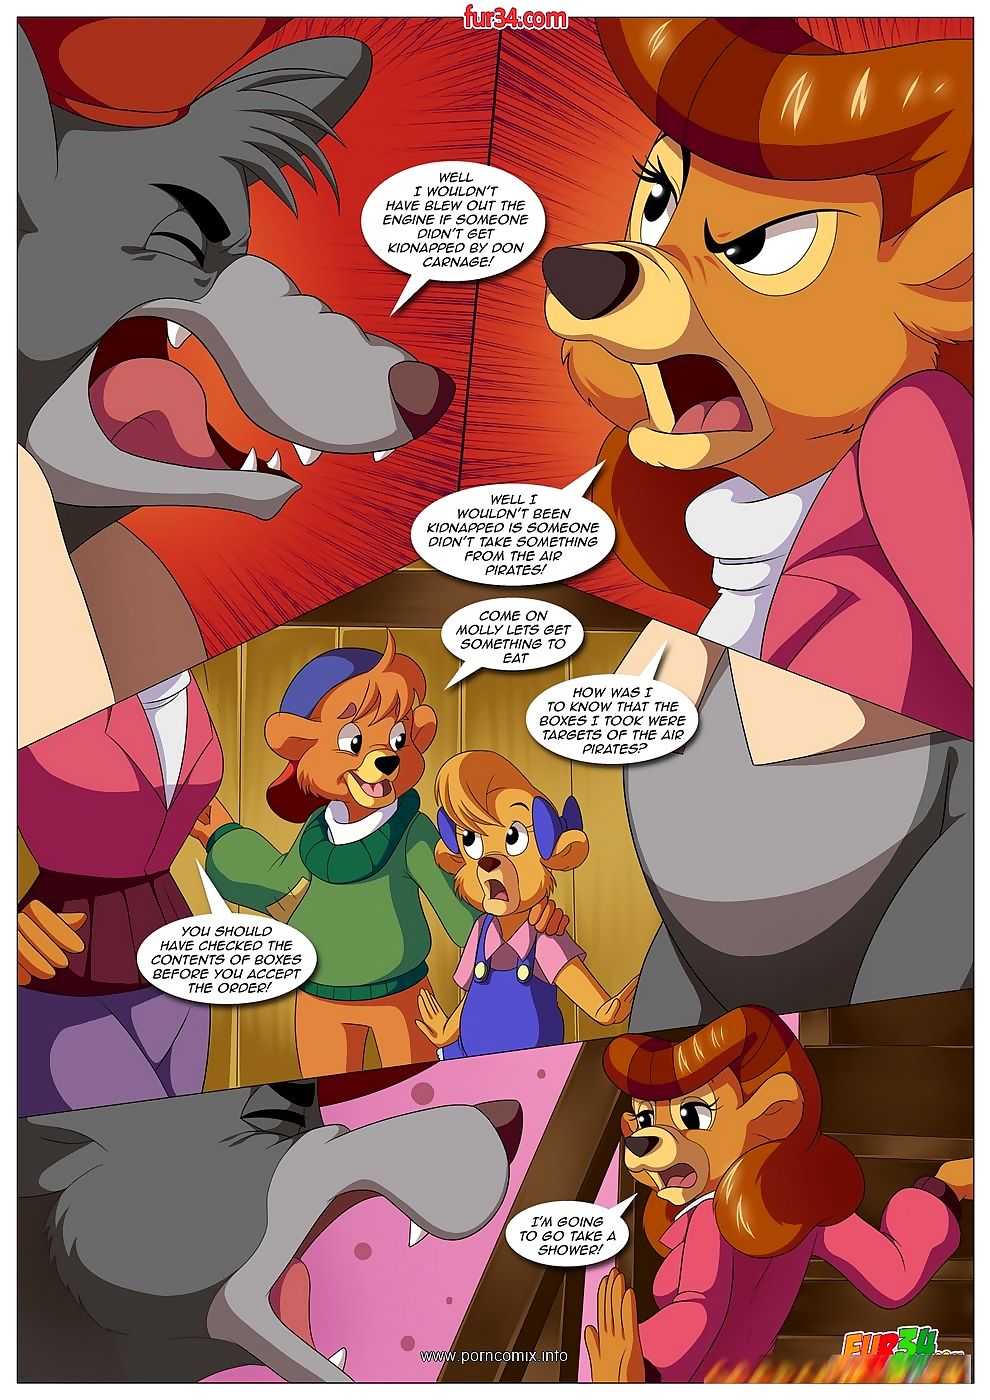 talespin cuento Fling palcomix page 1